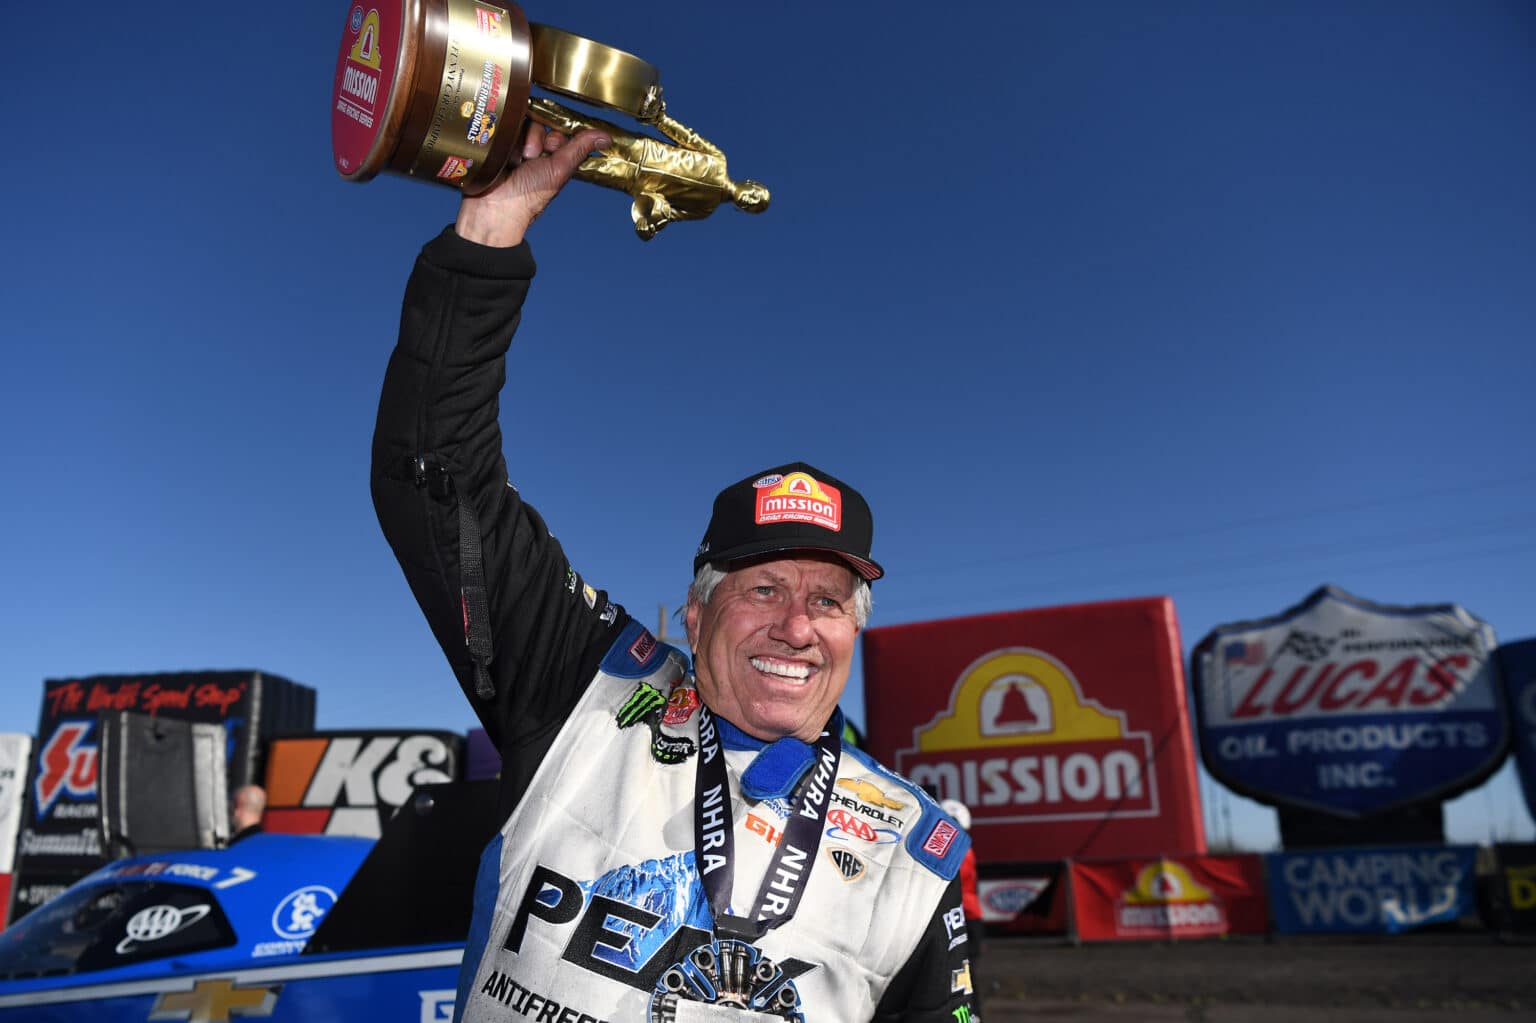 Drag racing great John Force improves, but faces long road to recovery after brain injury - Indianapolis Business Journal